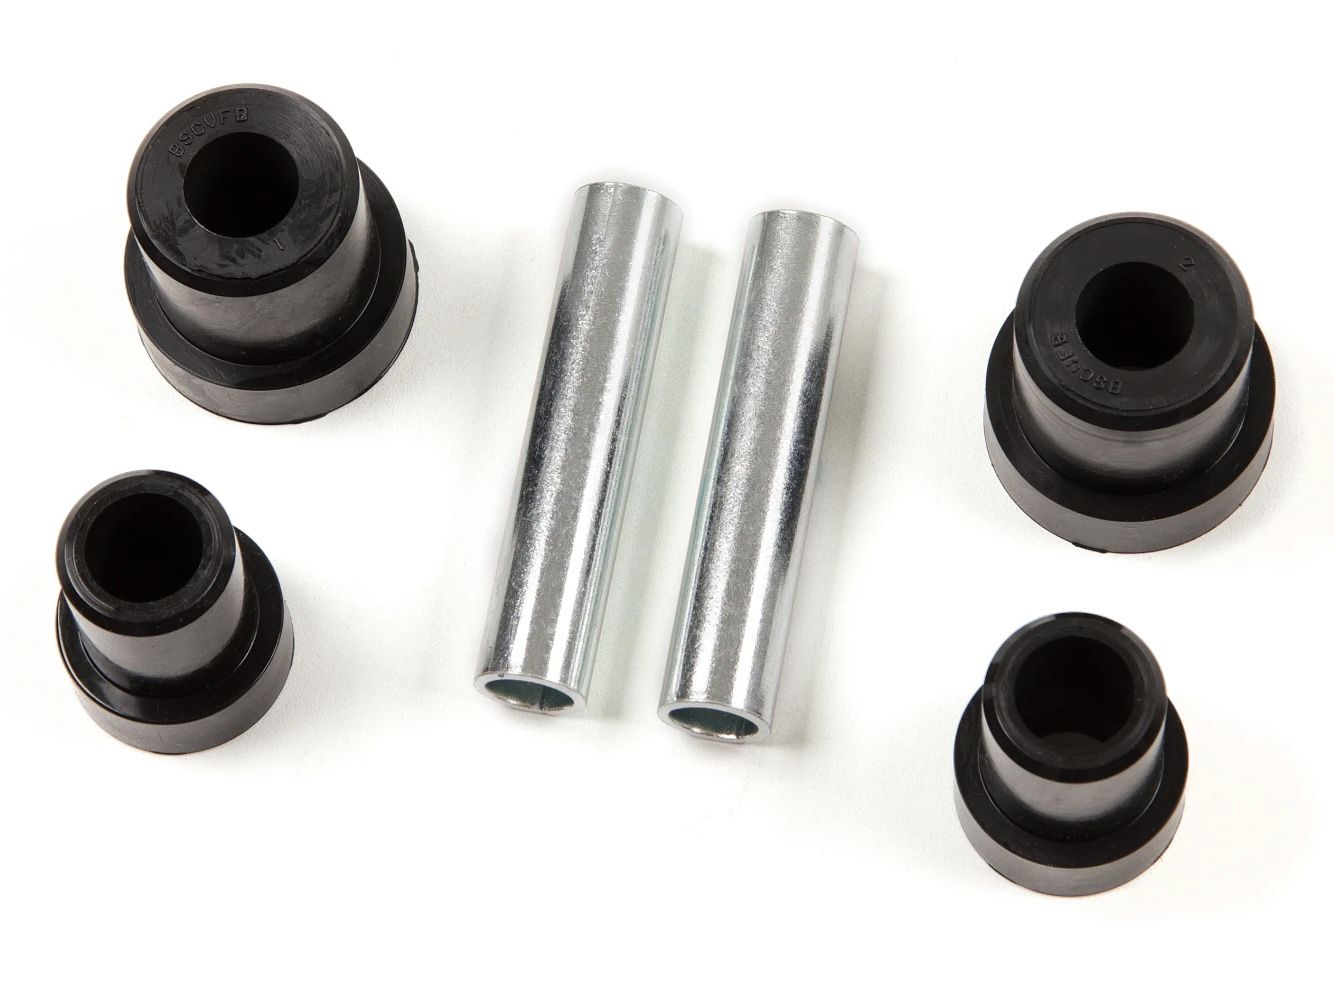 Blazer & Suburban 1/2, 3/4 ton 1988-1991 Chevy 4WD Front Leaf Spring Bushing Kit by Zone Off-Road